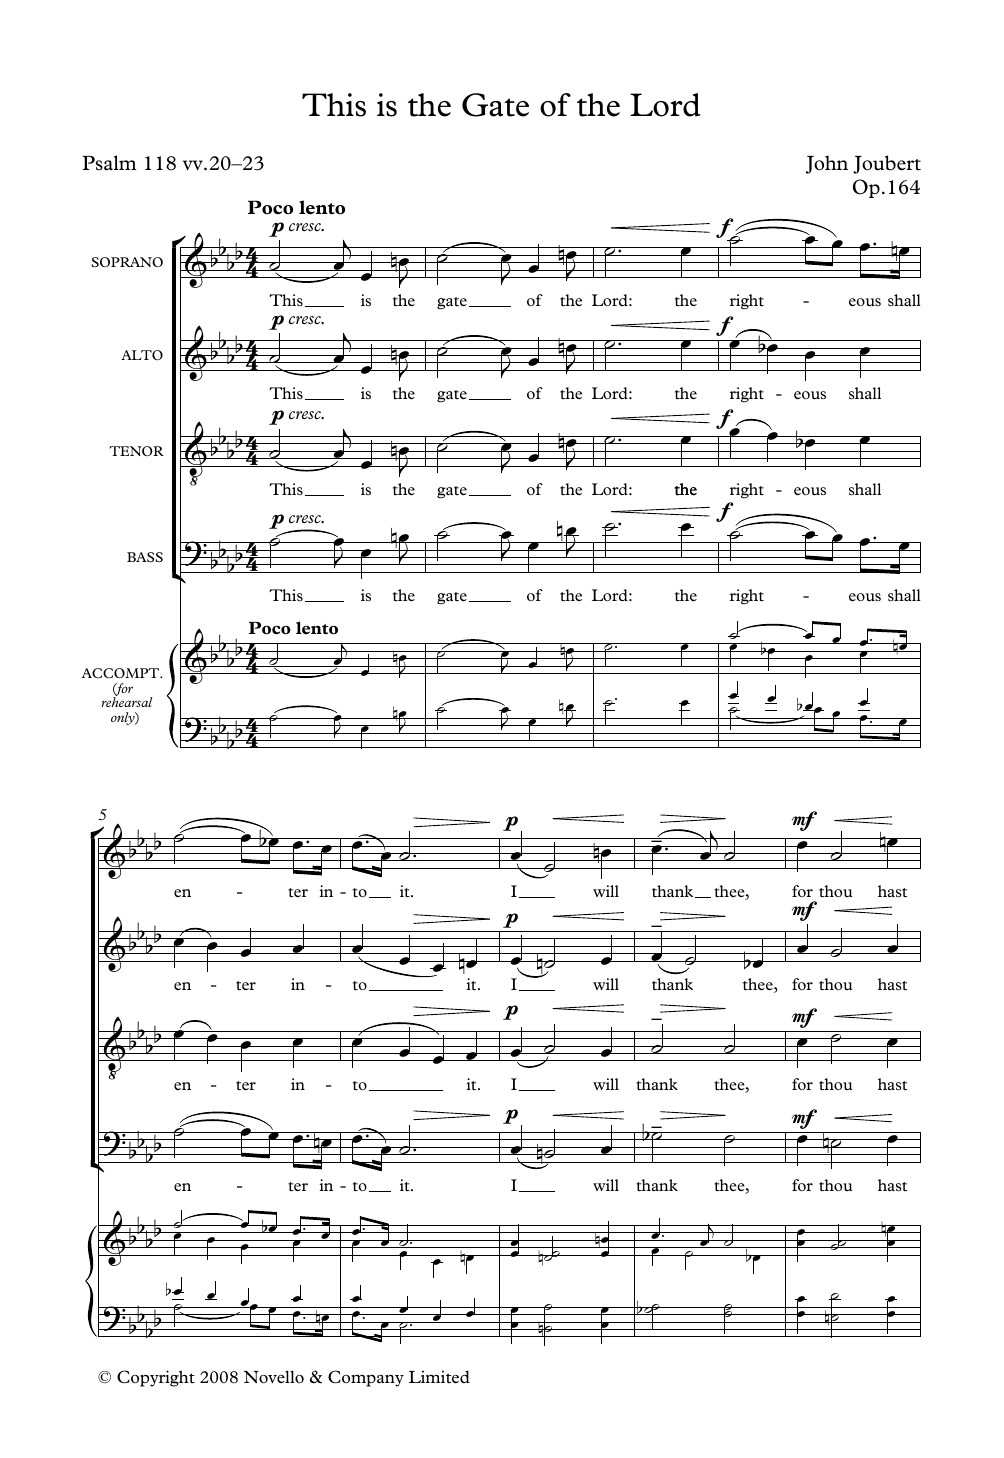 Download John Joubert This Is The Gate Of The Lord Sheet Music